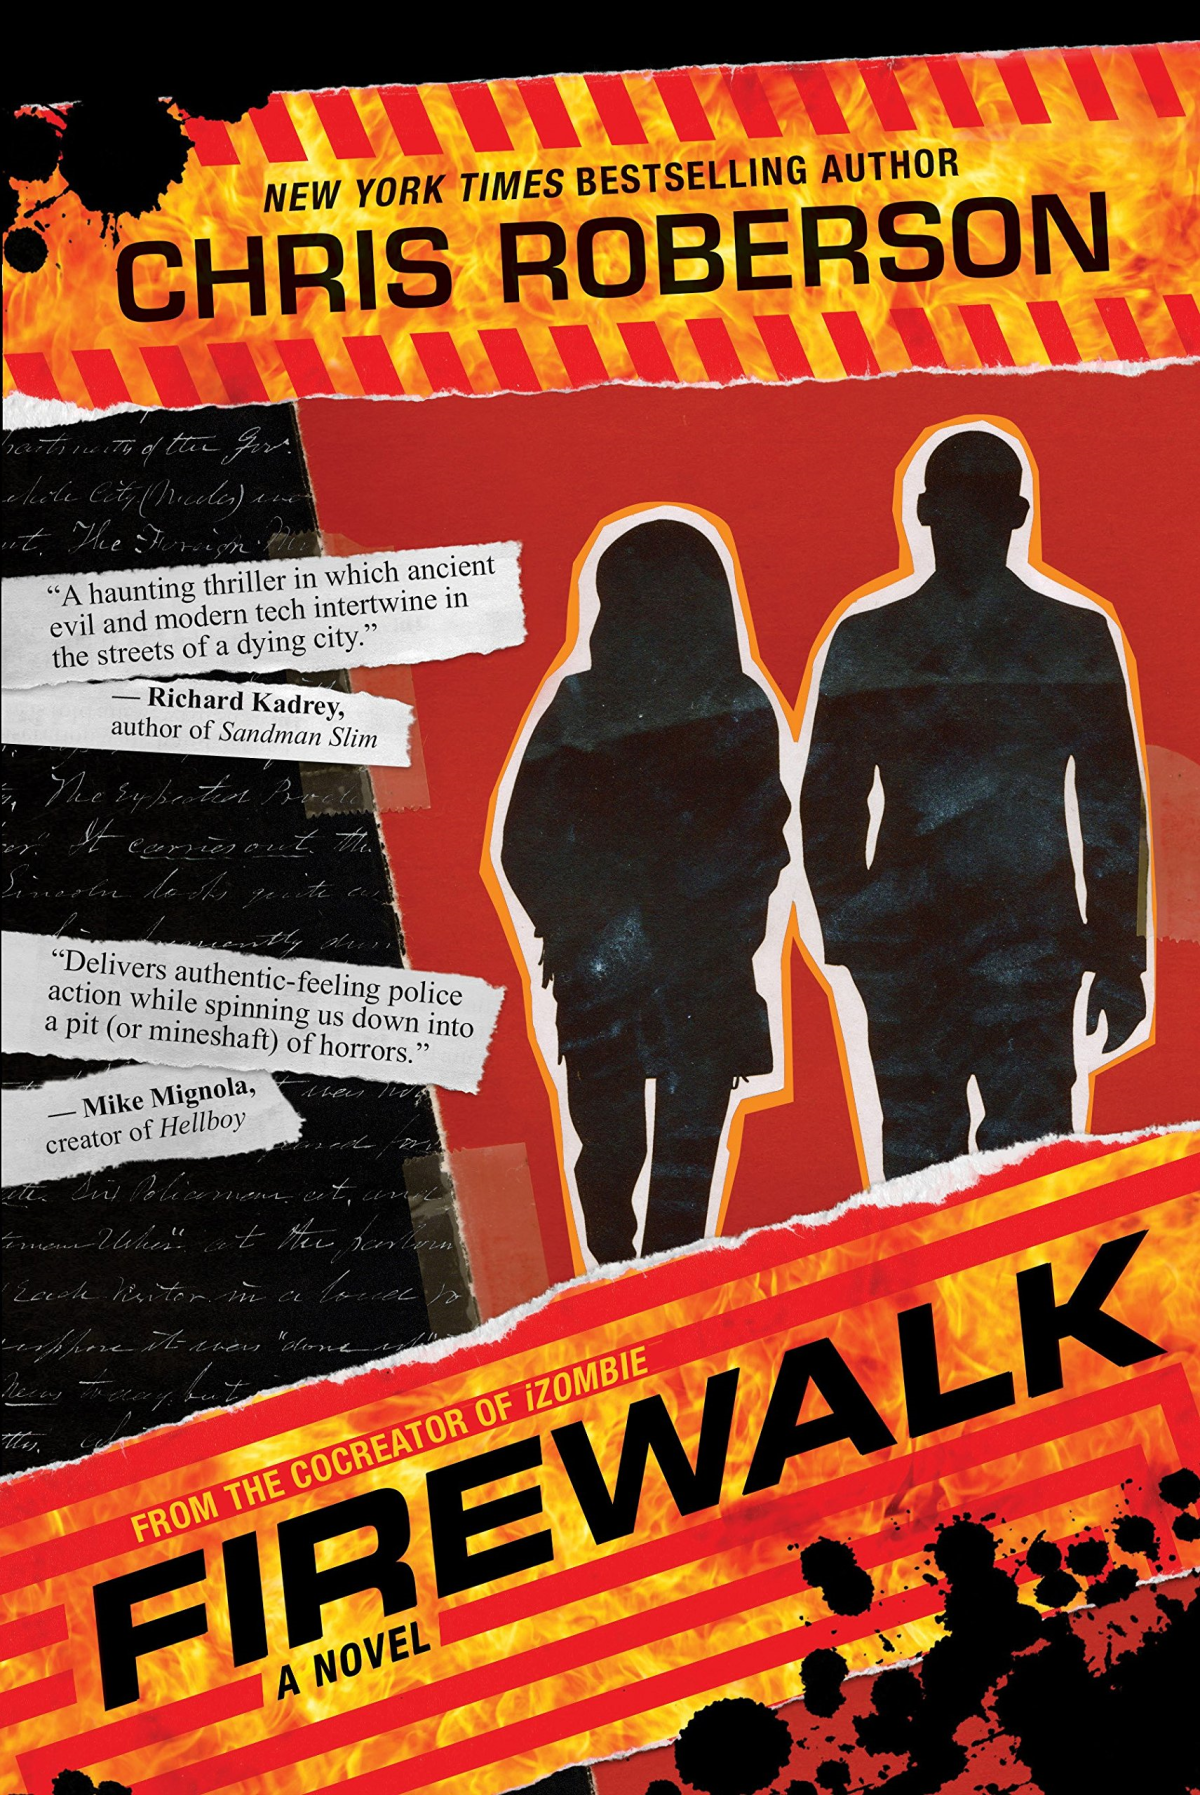 Firewalk Review: A Mystical Thriller With Diverse Characters